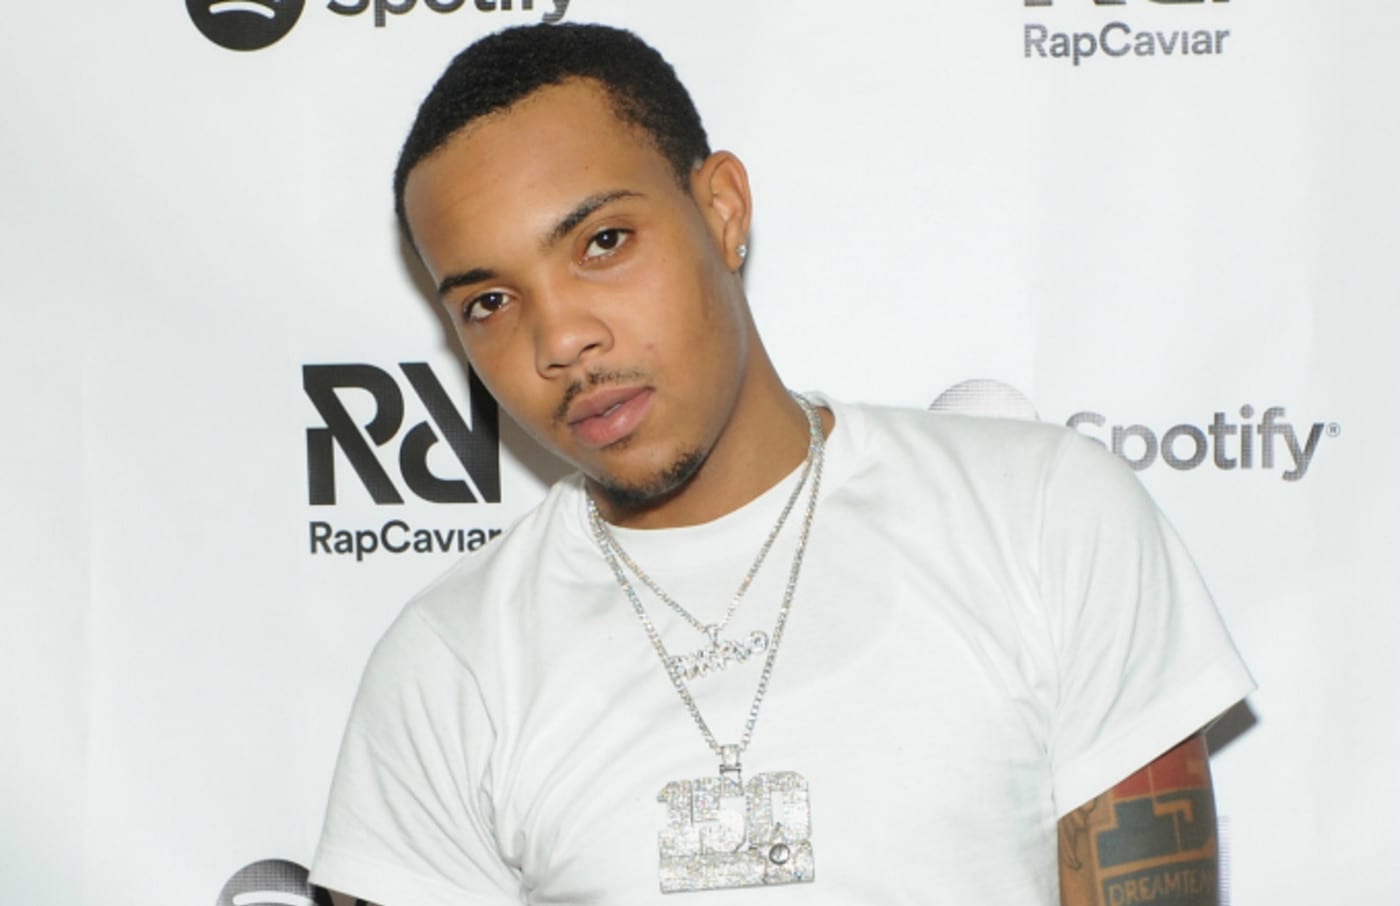 G Herbo Net Worth Know All About The Rapper's Work And Earnings